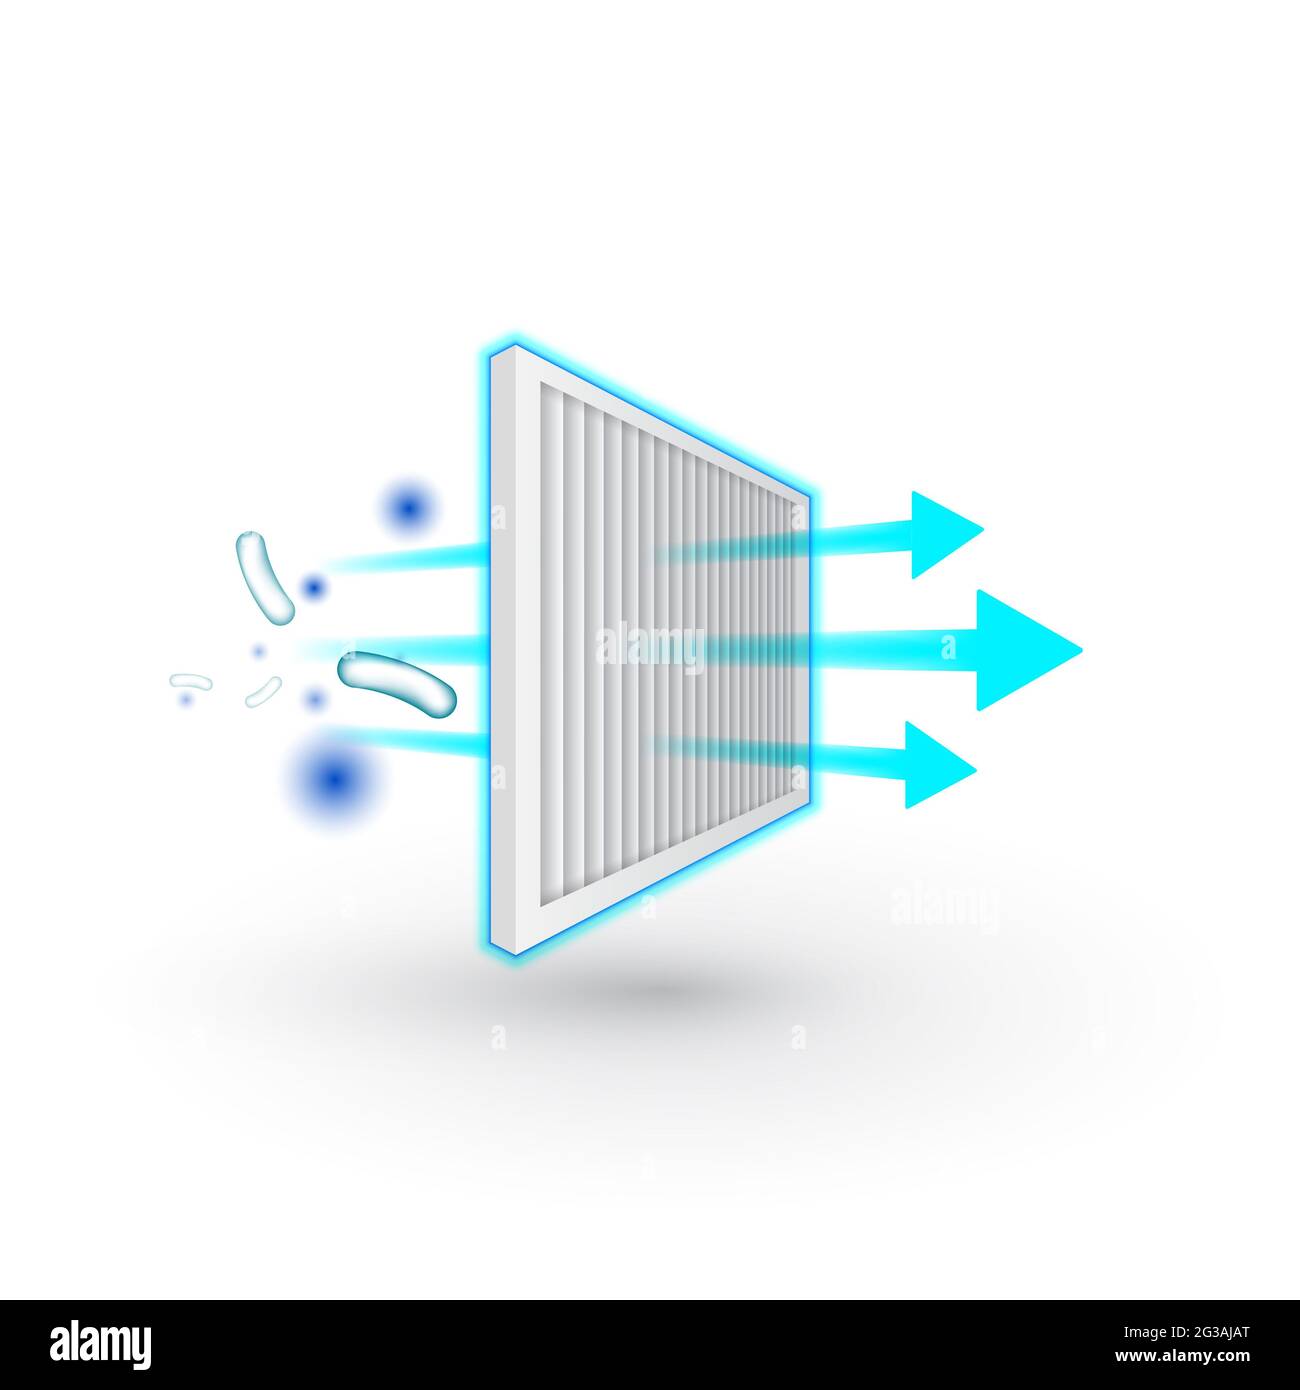 Air purifier. Air filter icon. Solid Particle and Bacterial Filter. Stock Photo